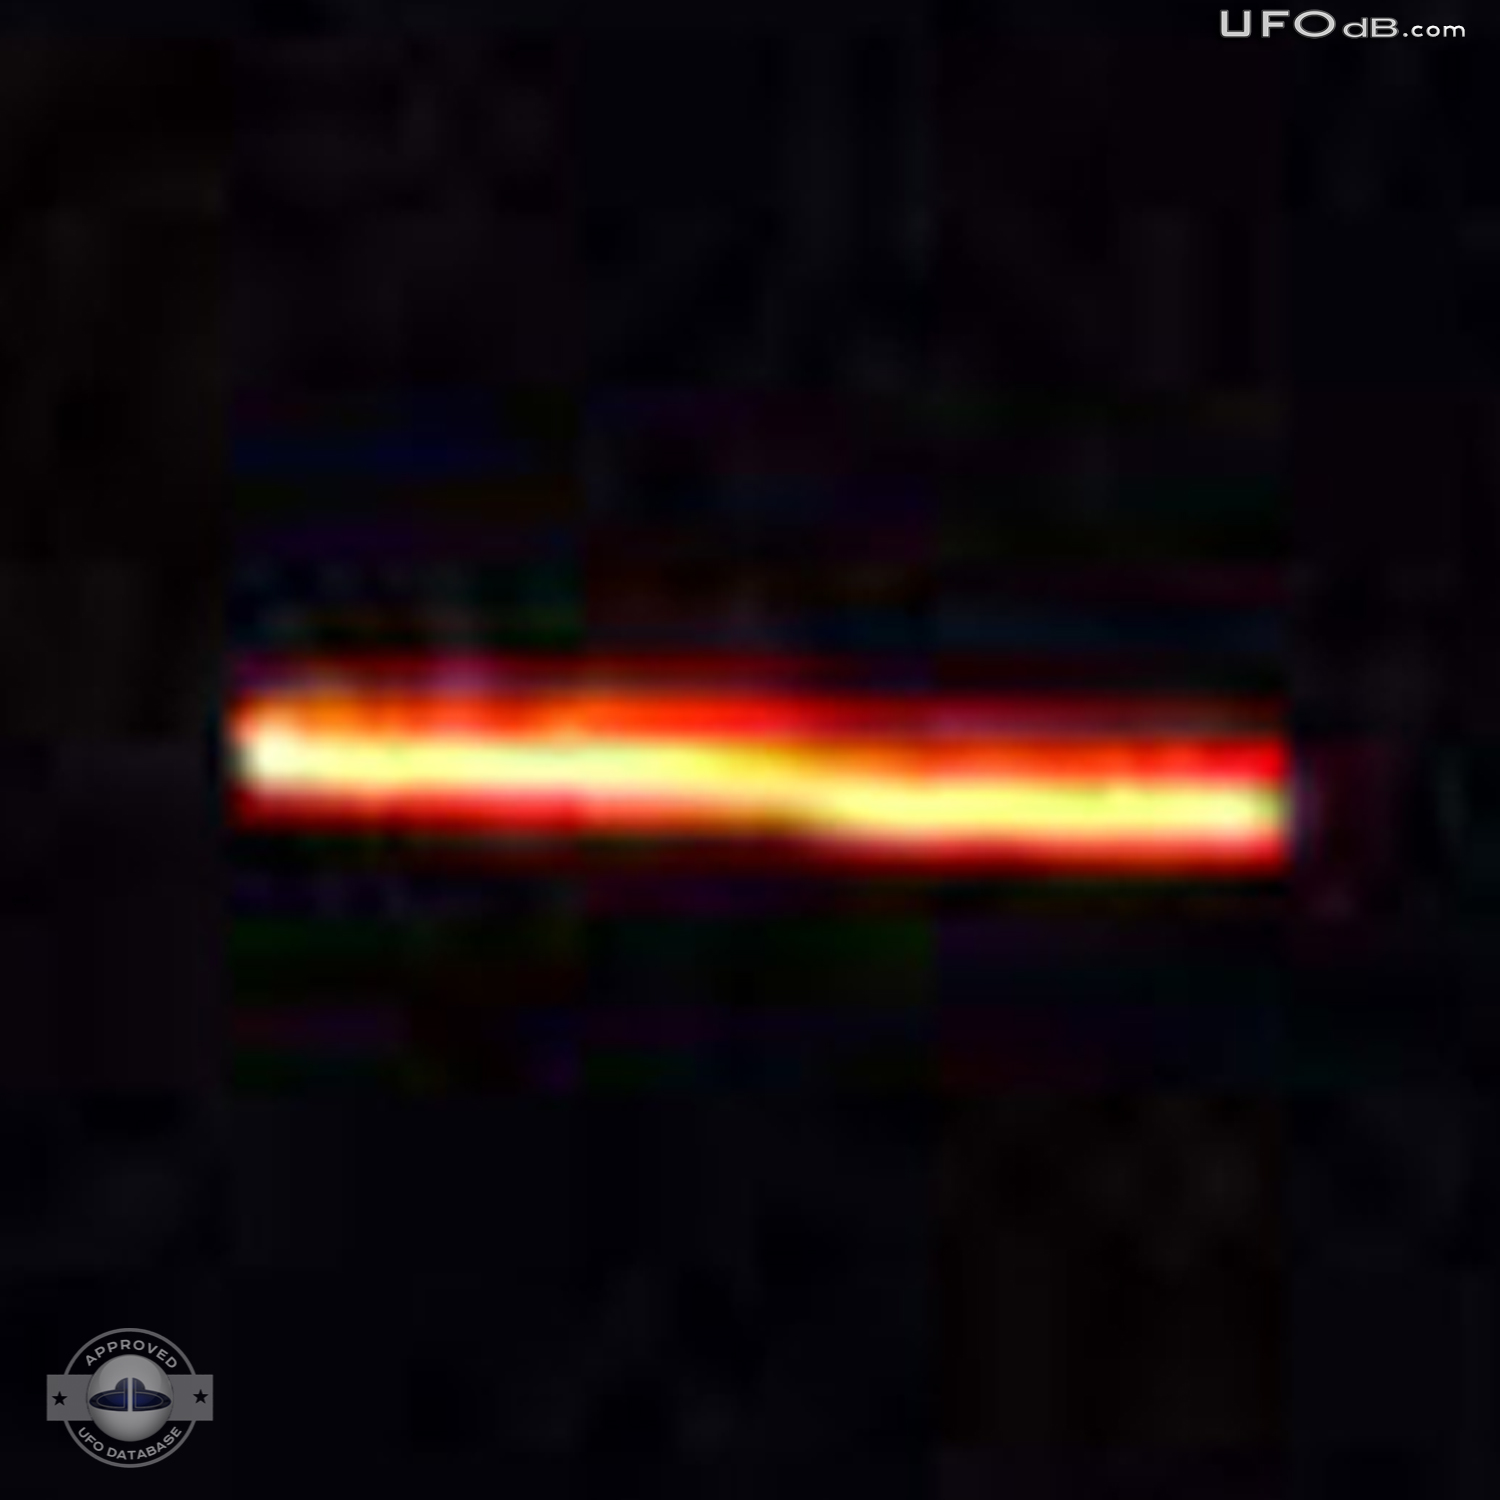 Two orbs UFO over Agimak Lake near Ignace in Ontario Canada, July 2011 UFO Picture #357-5